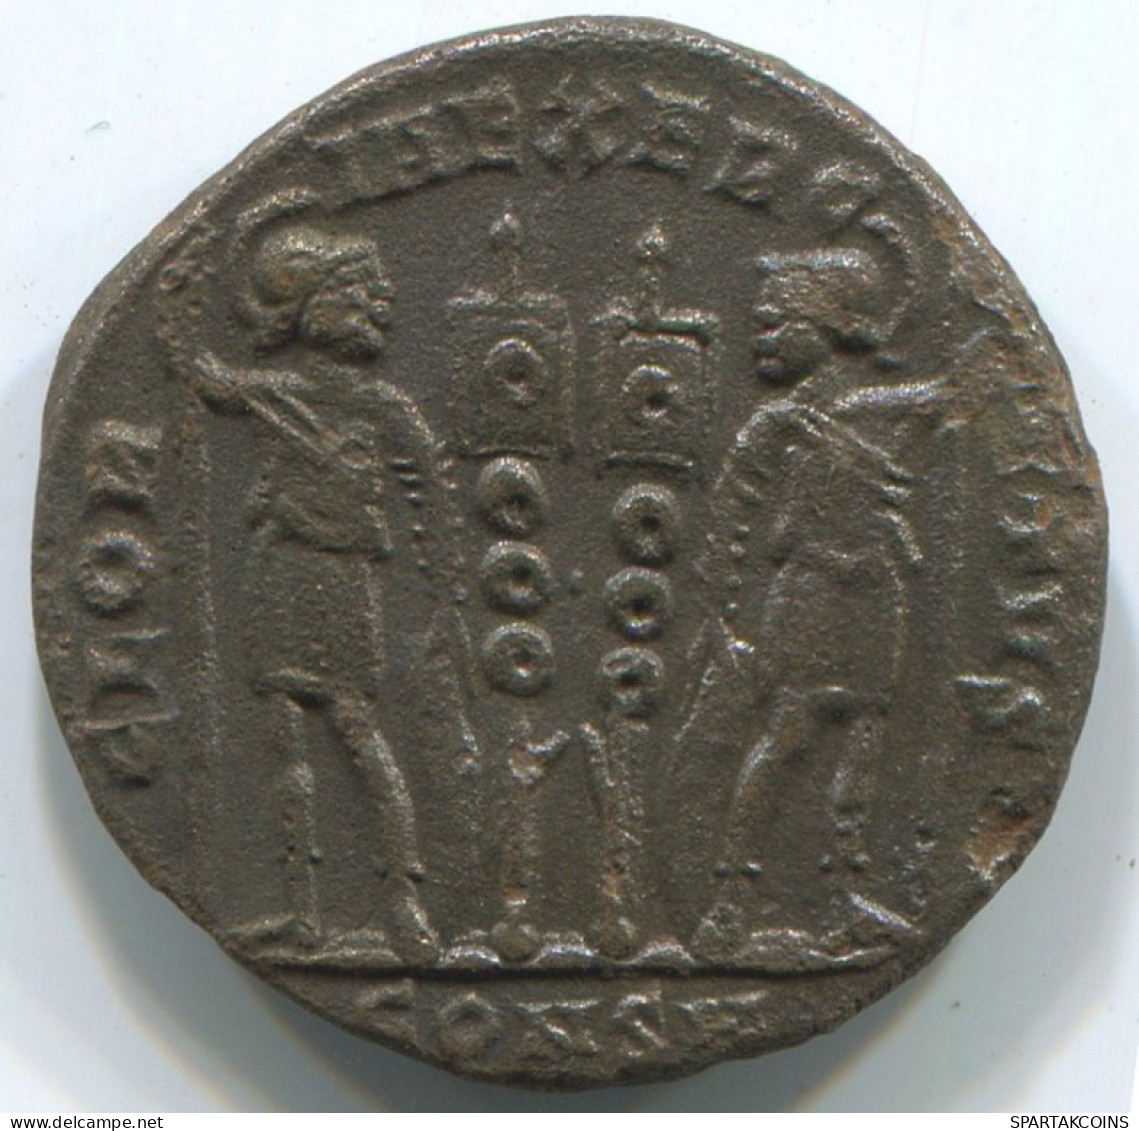 LATE ROMAN EMPIRE Pièce Antique Authentique Roman Pièce 2.3g/16mm #ANT2203.14.F.A - The End Of Empire (363 AD To 476 AD)